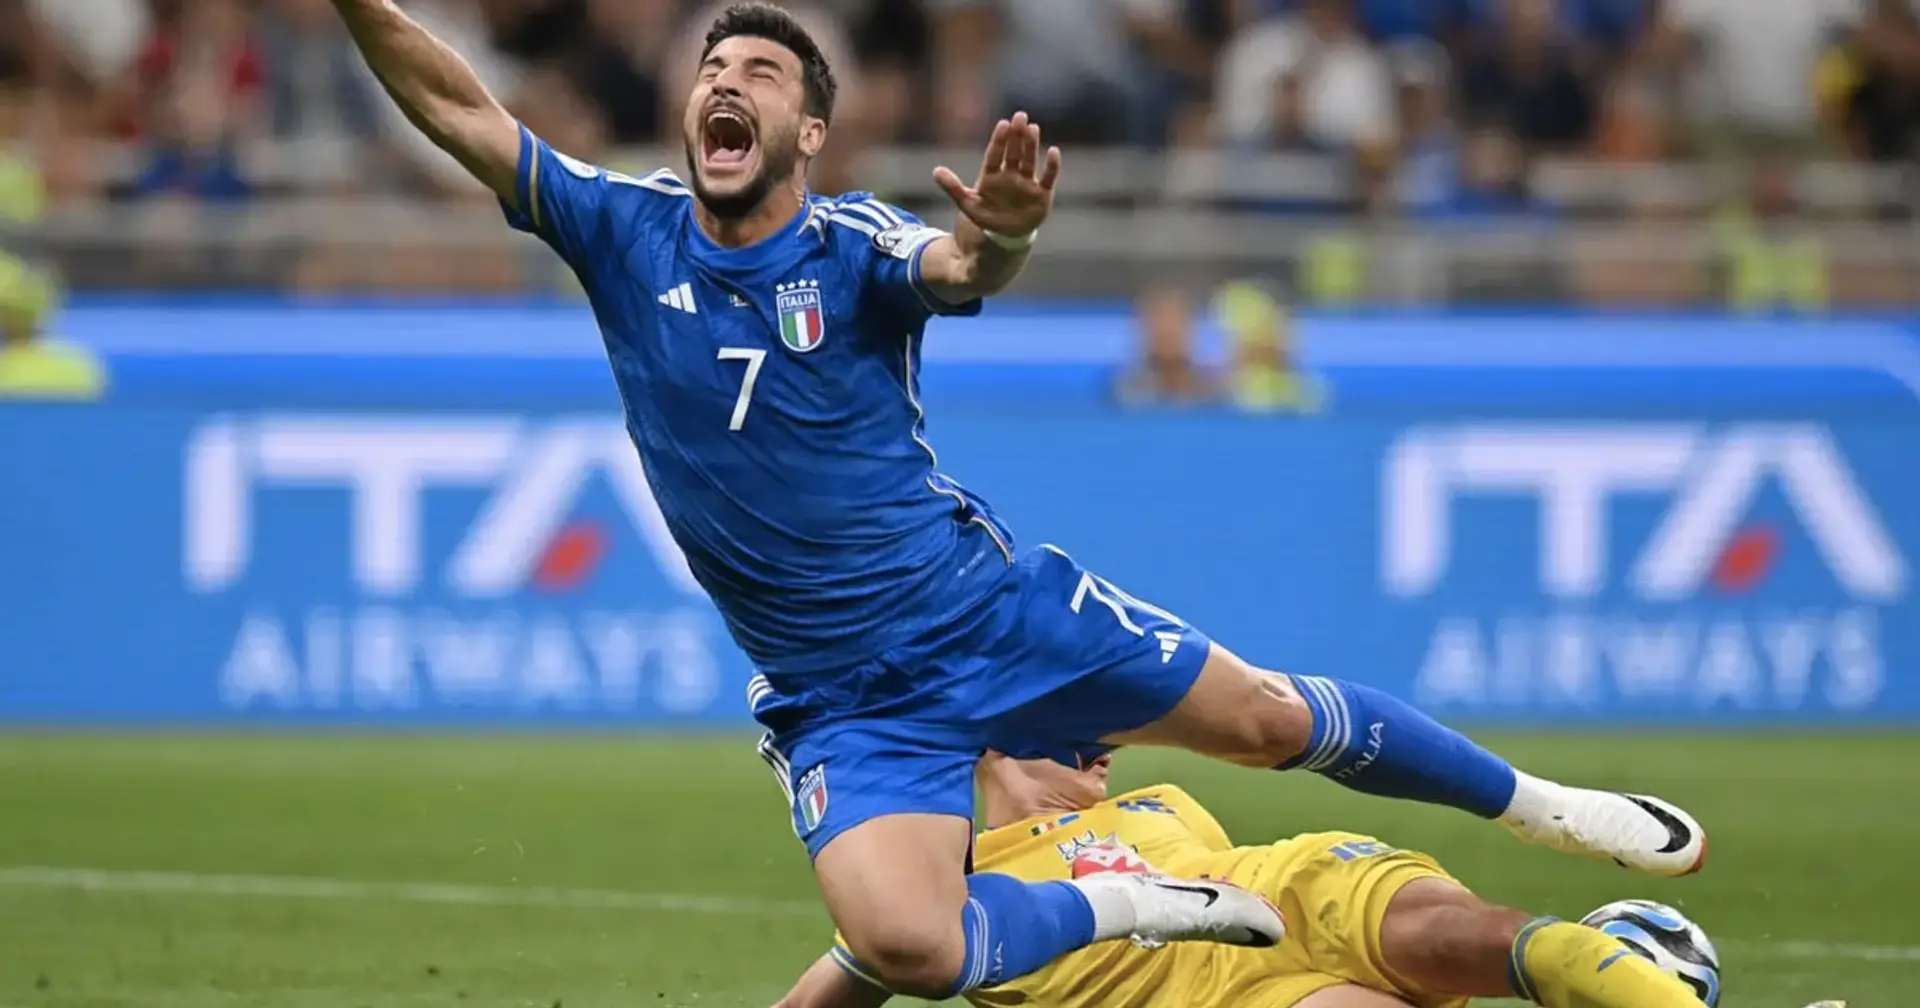 Where to watch Ukraine vs Italy today? Answered 